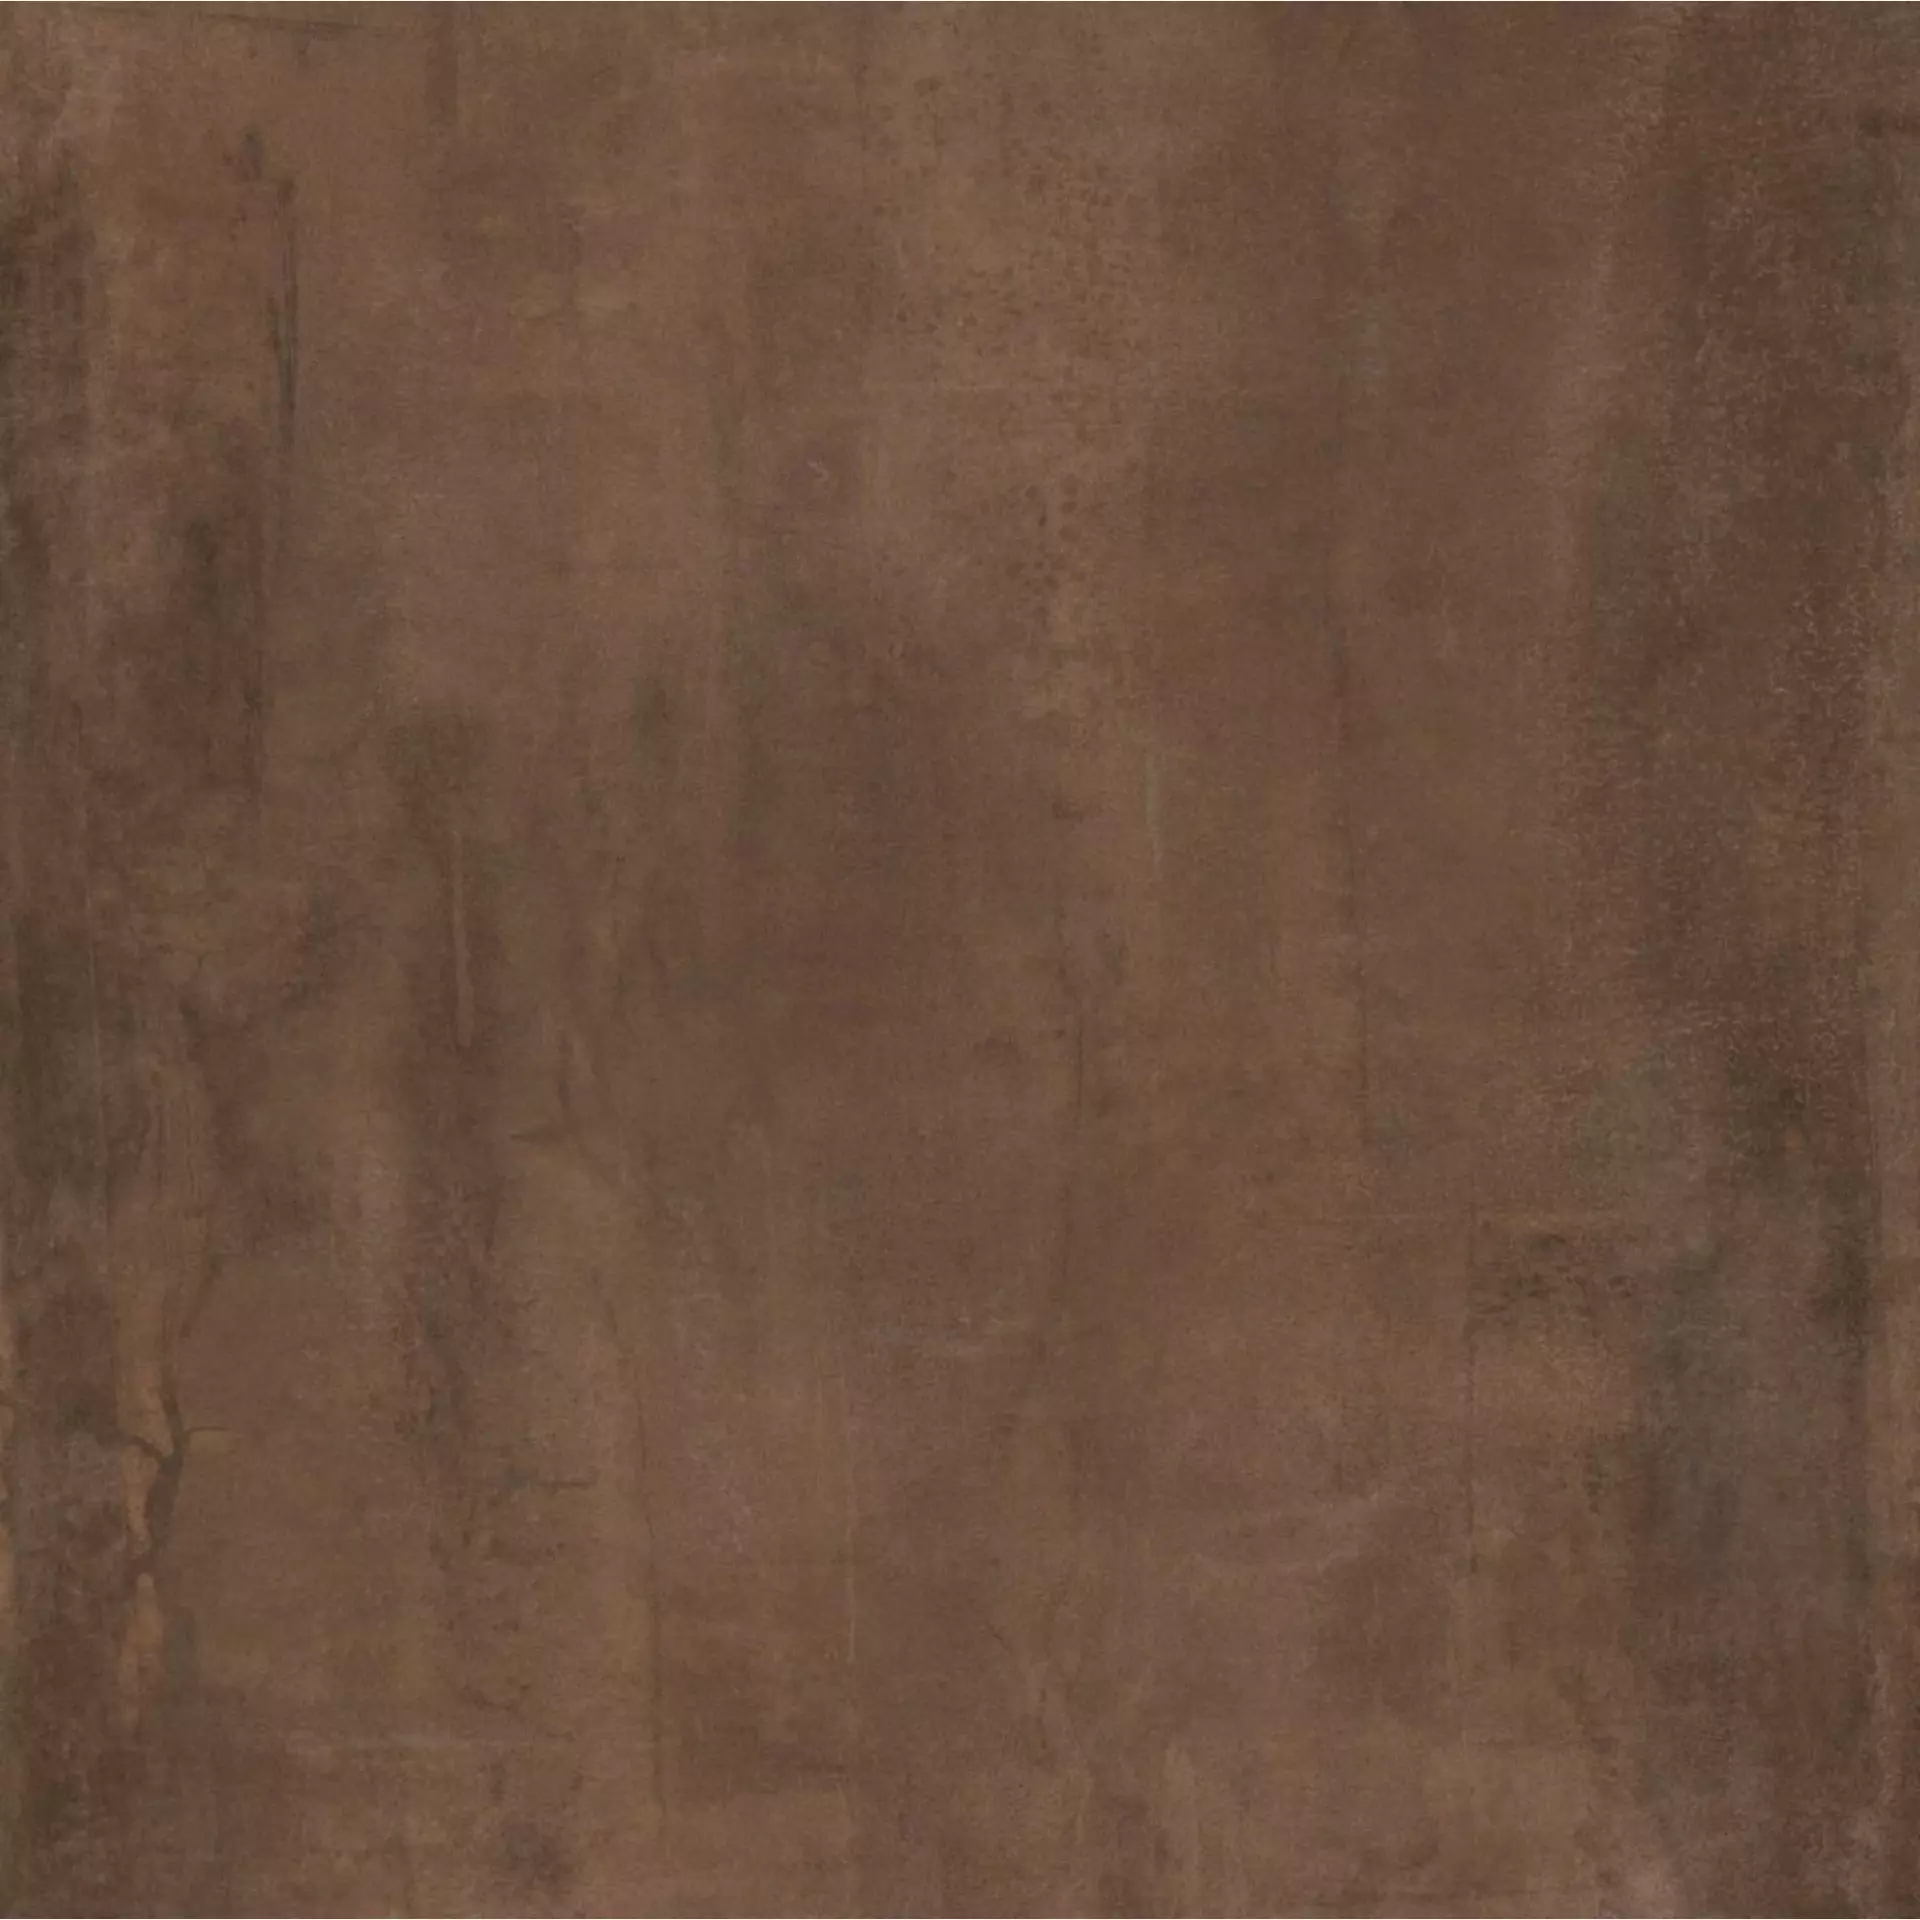 ABK Interno9 Rust Naturale I9R01300 60x60cm rectified 8,5mm